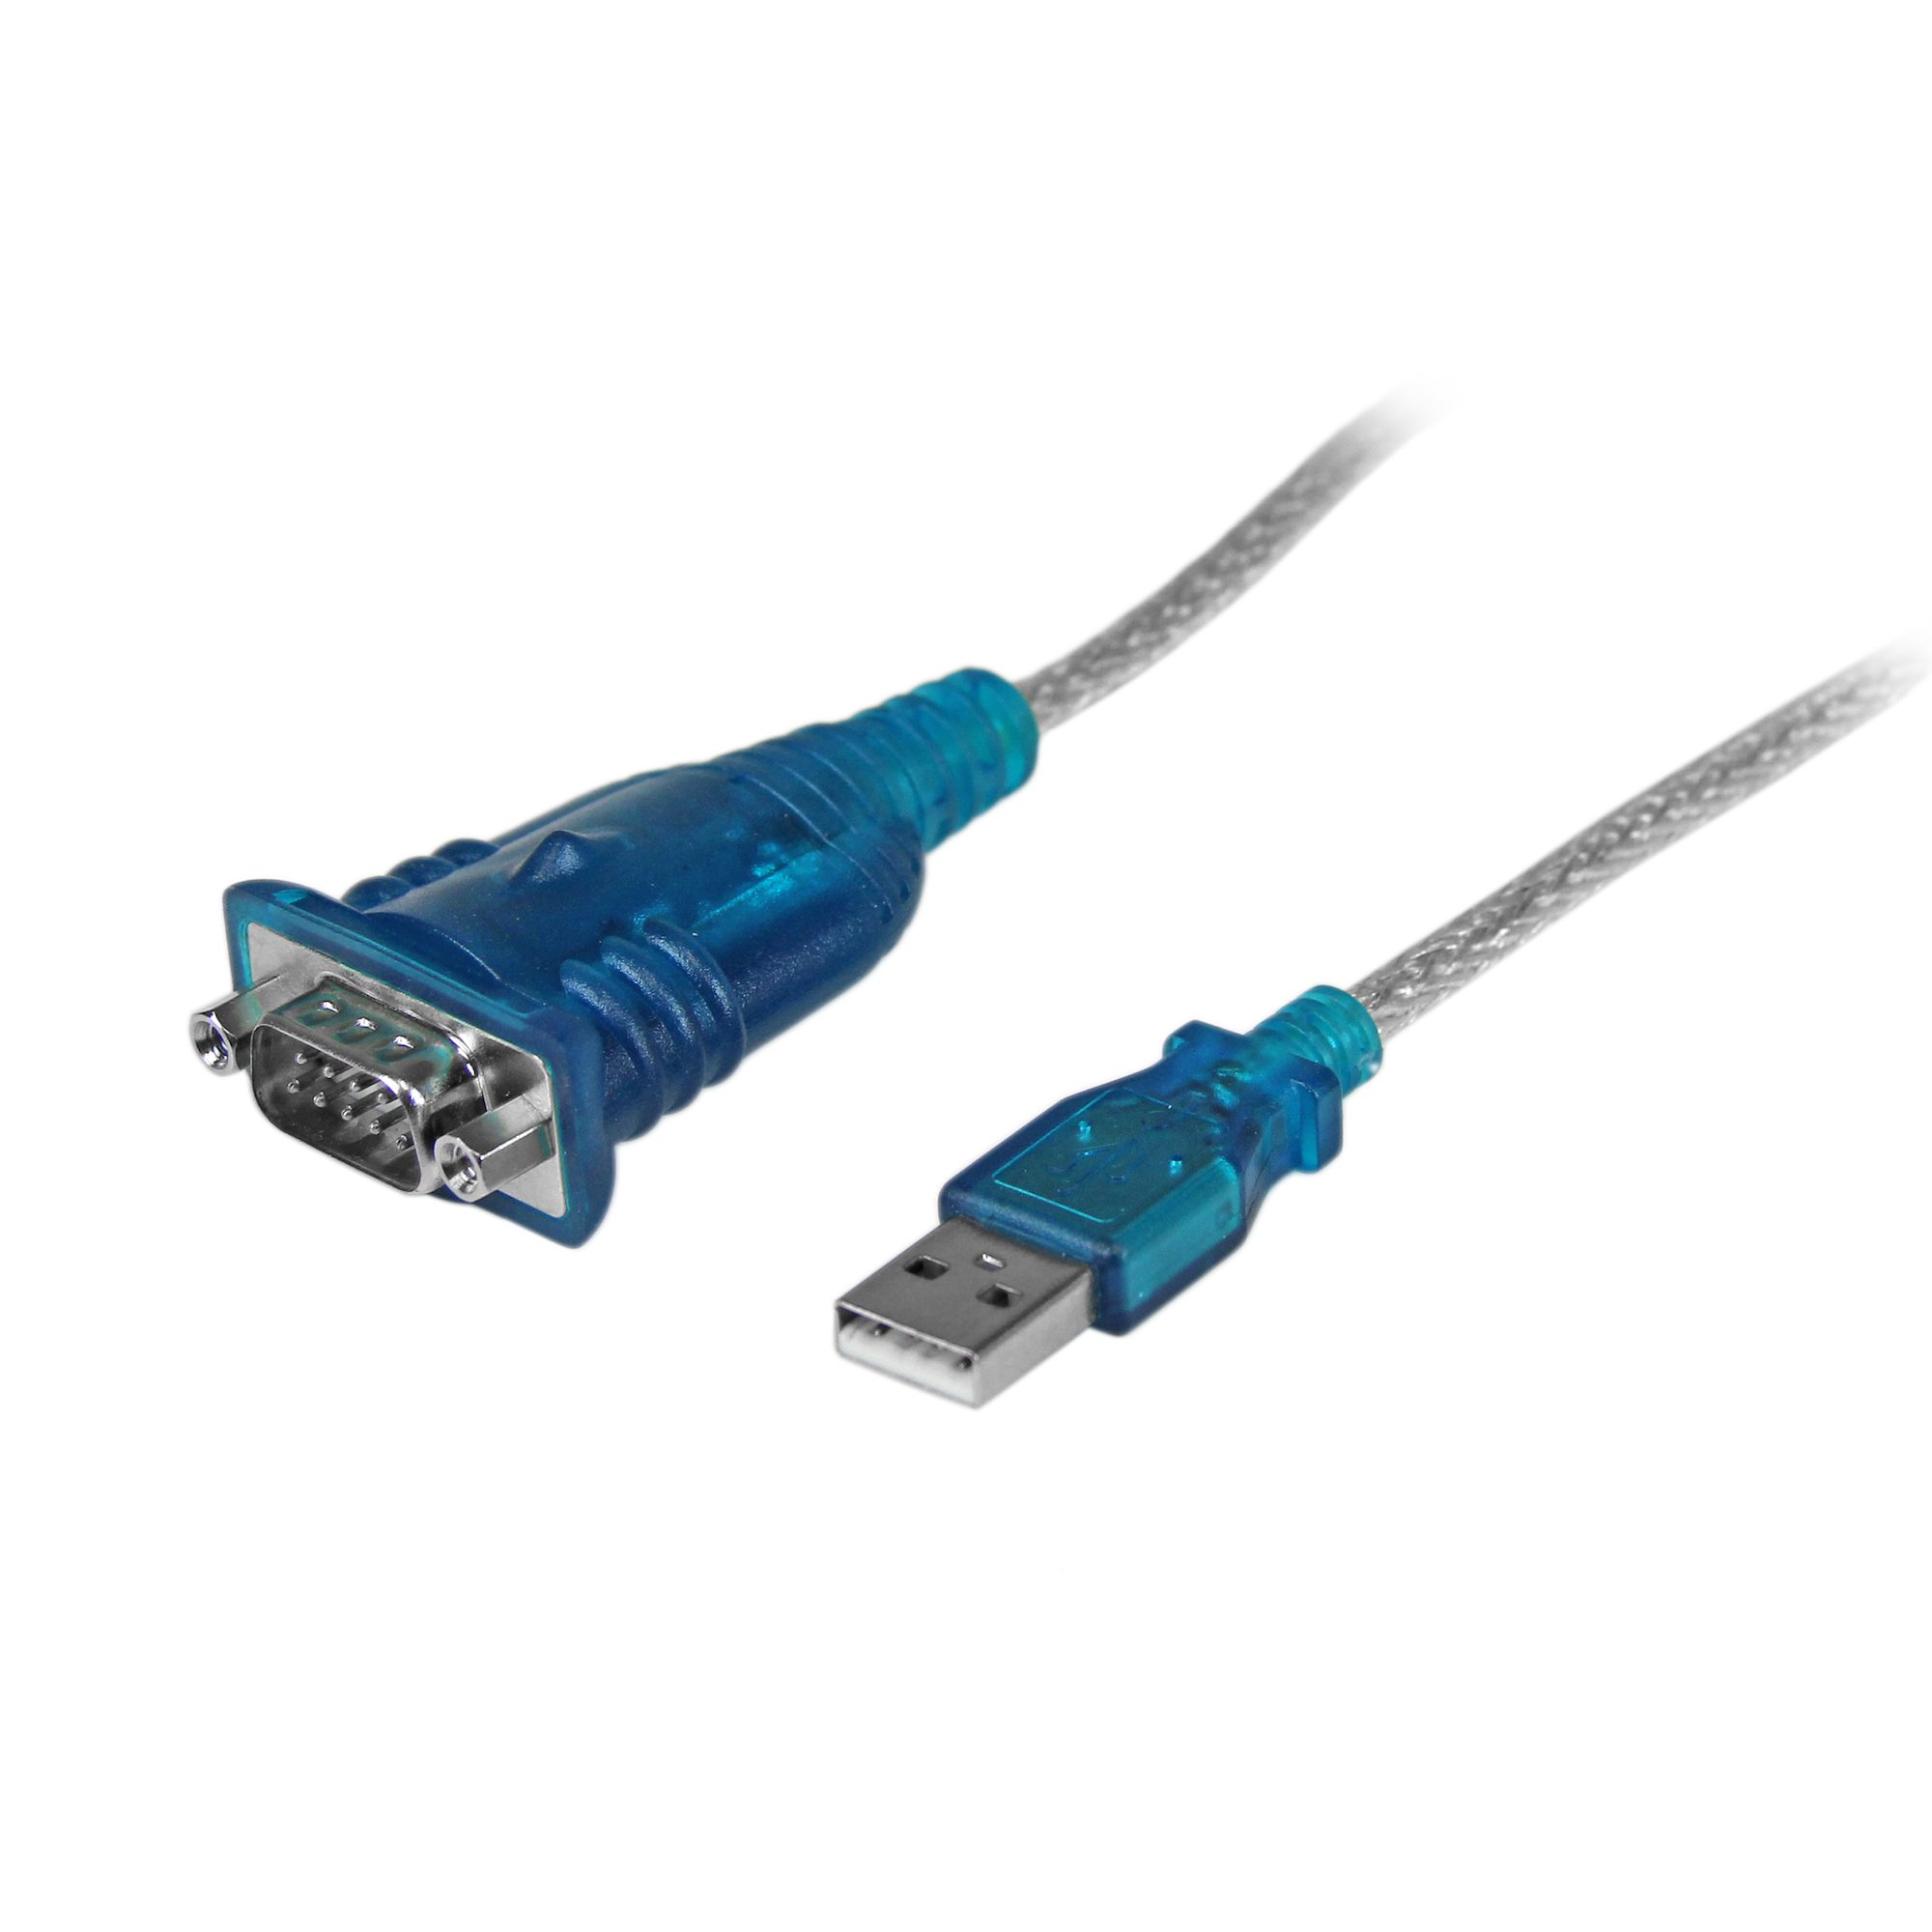 【ICUSB232V2】USB TO RS232 SERIAL ADAPTER